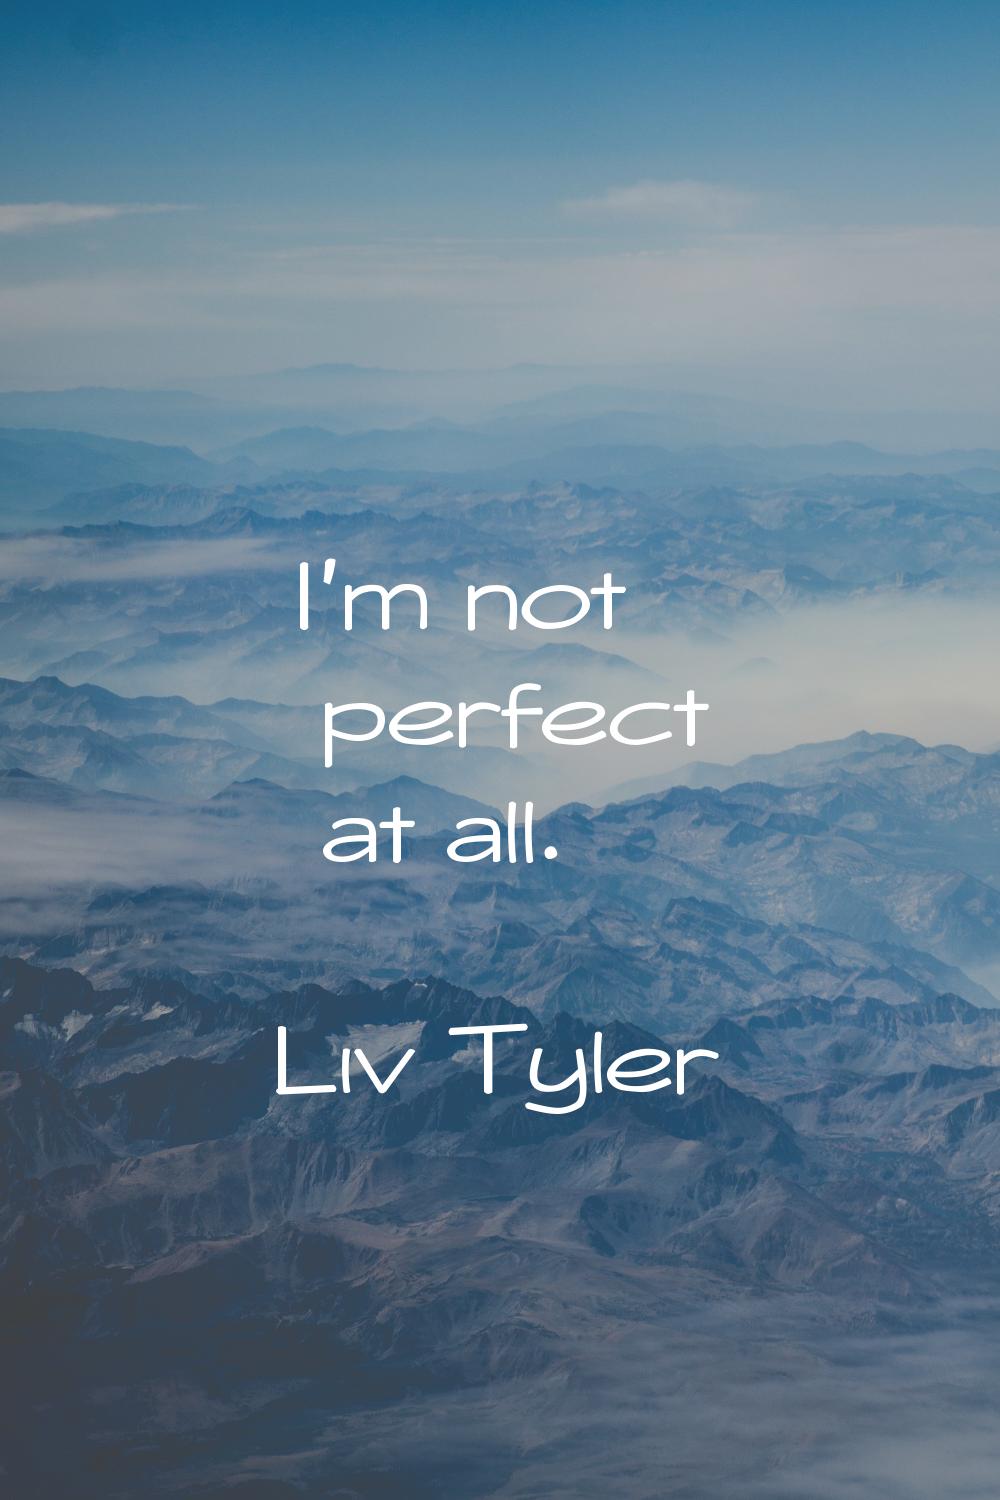 I'm not perfect at all.